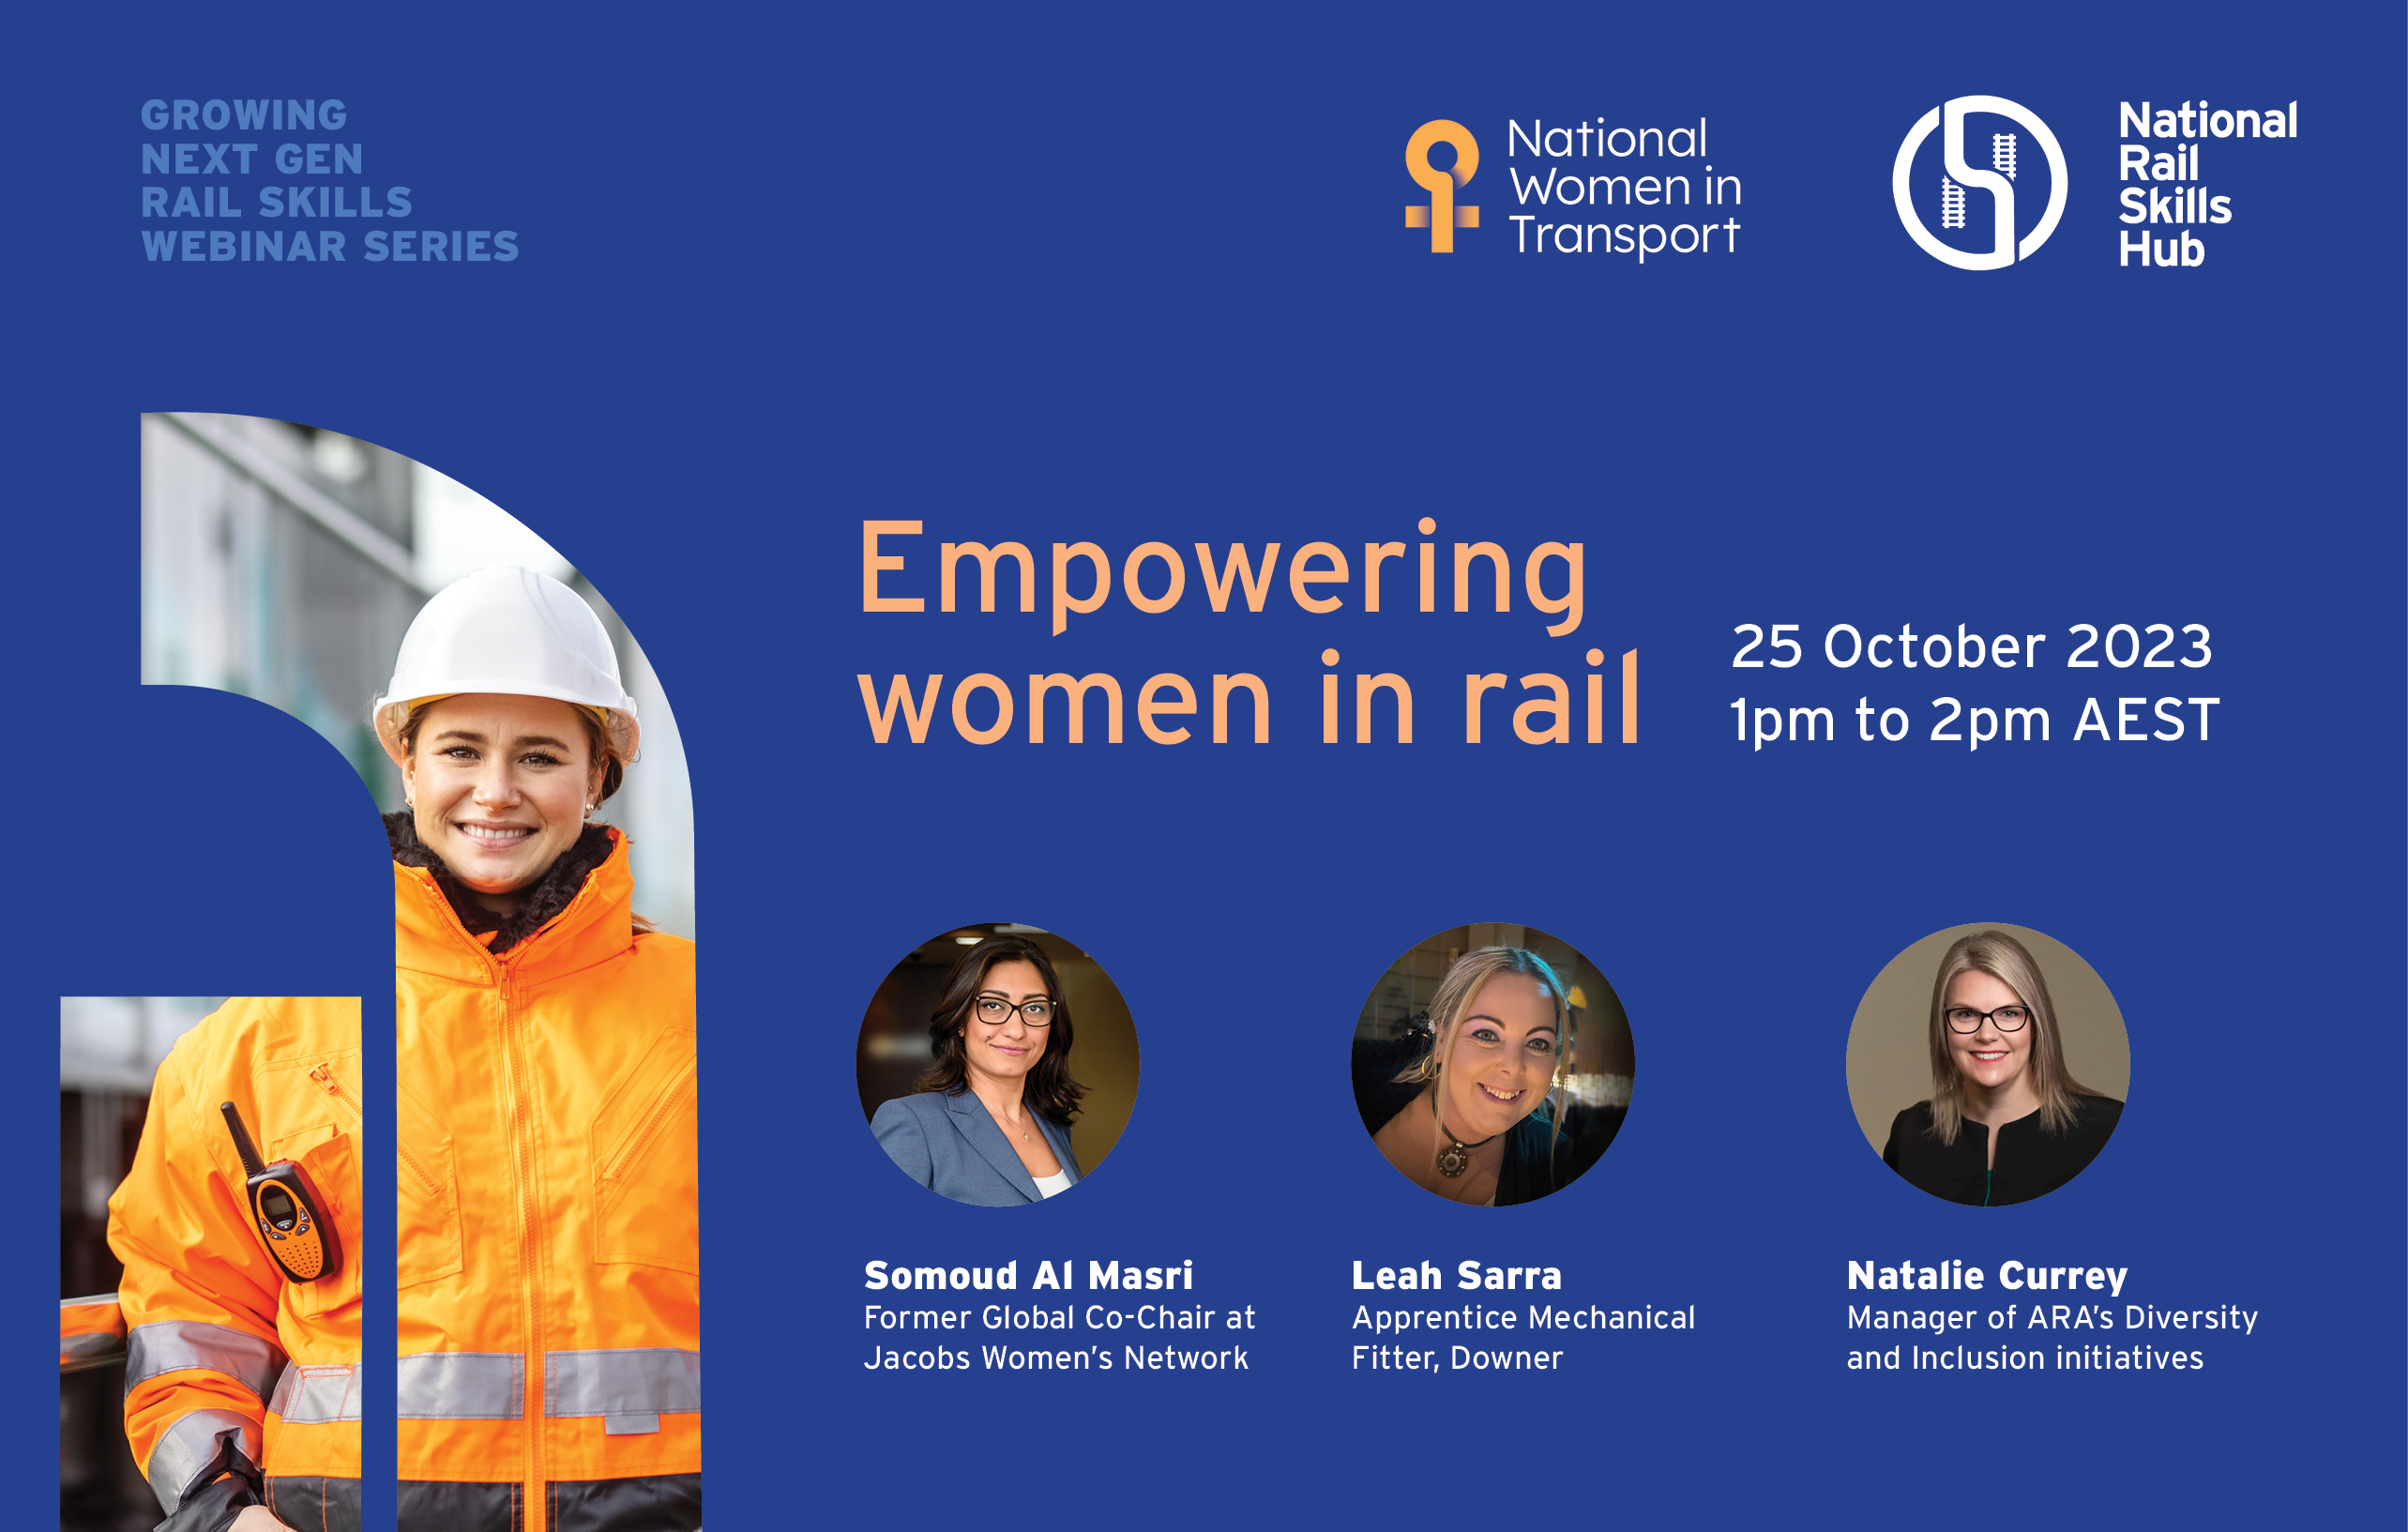 Image to promote the webinar Empowering women in rail, with link to registration site